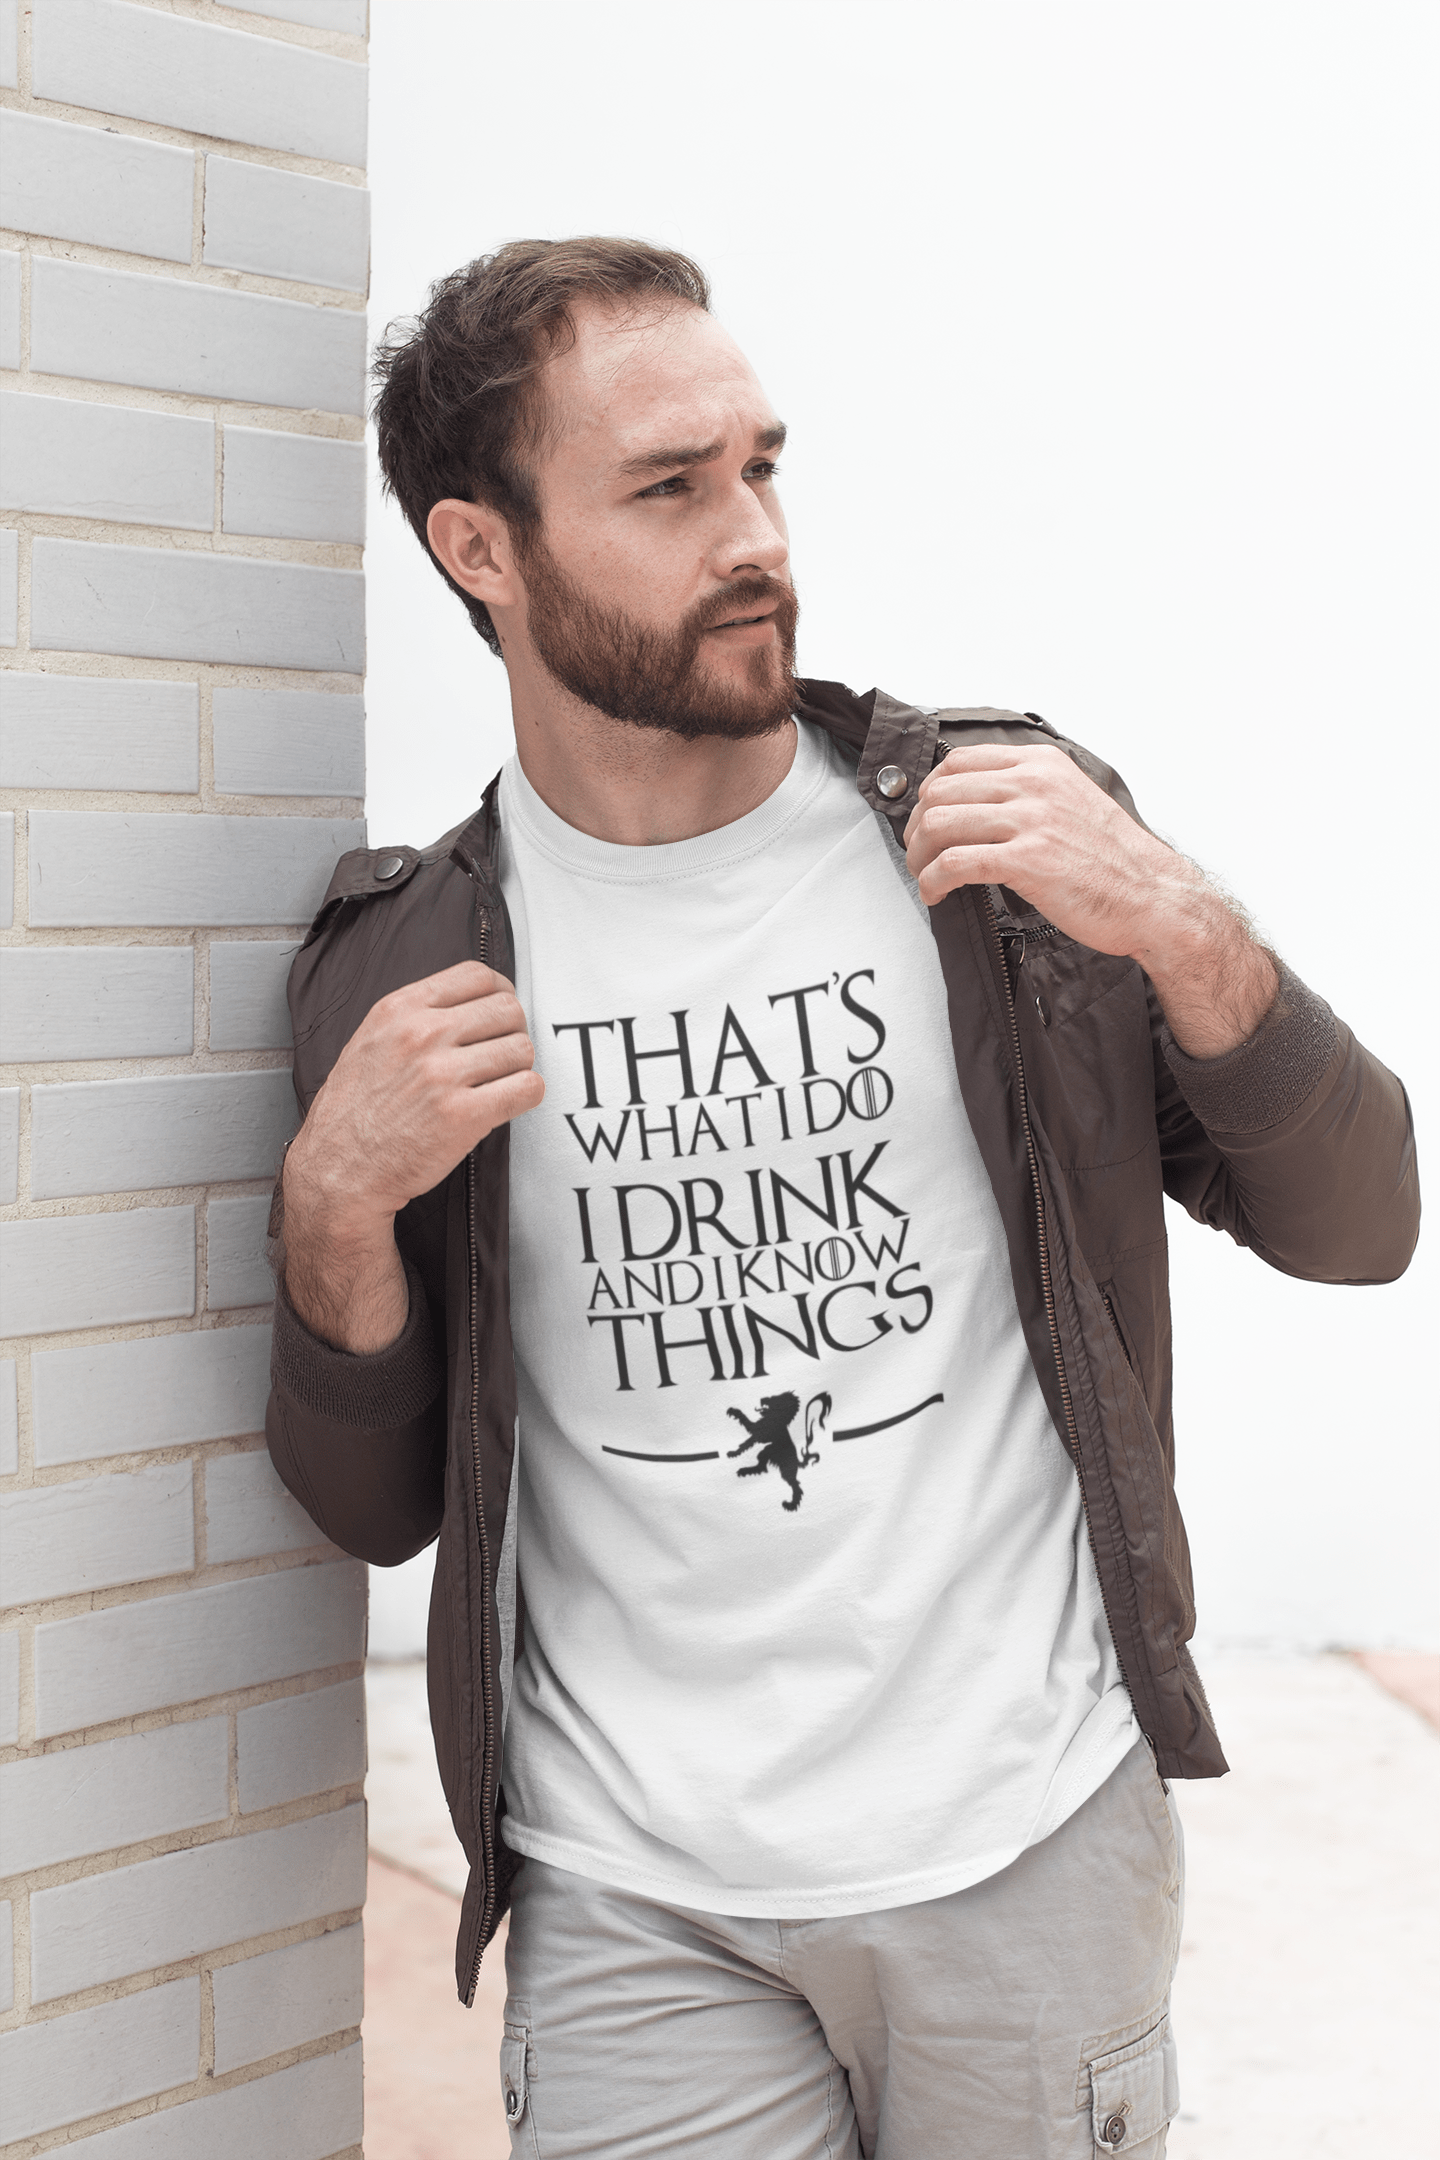 That's What I Do I Drink and I know Things - GOT T-Shirt - Weißes Herren-T-Shirt, 100 % Baumwolle 00260